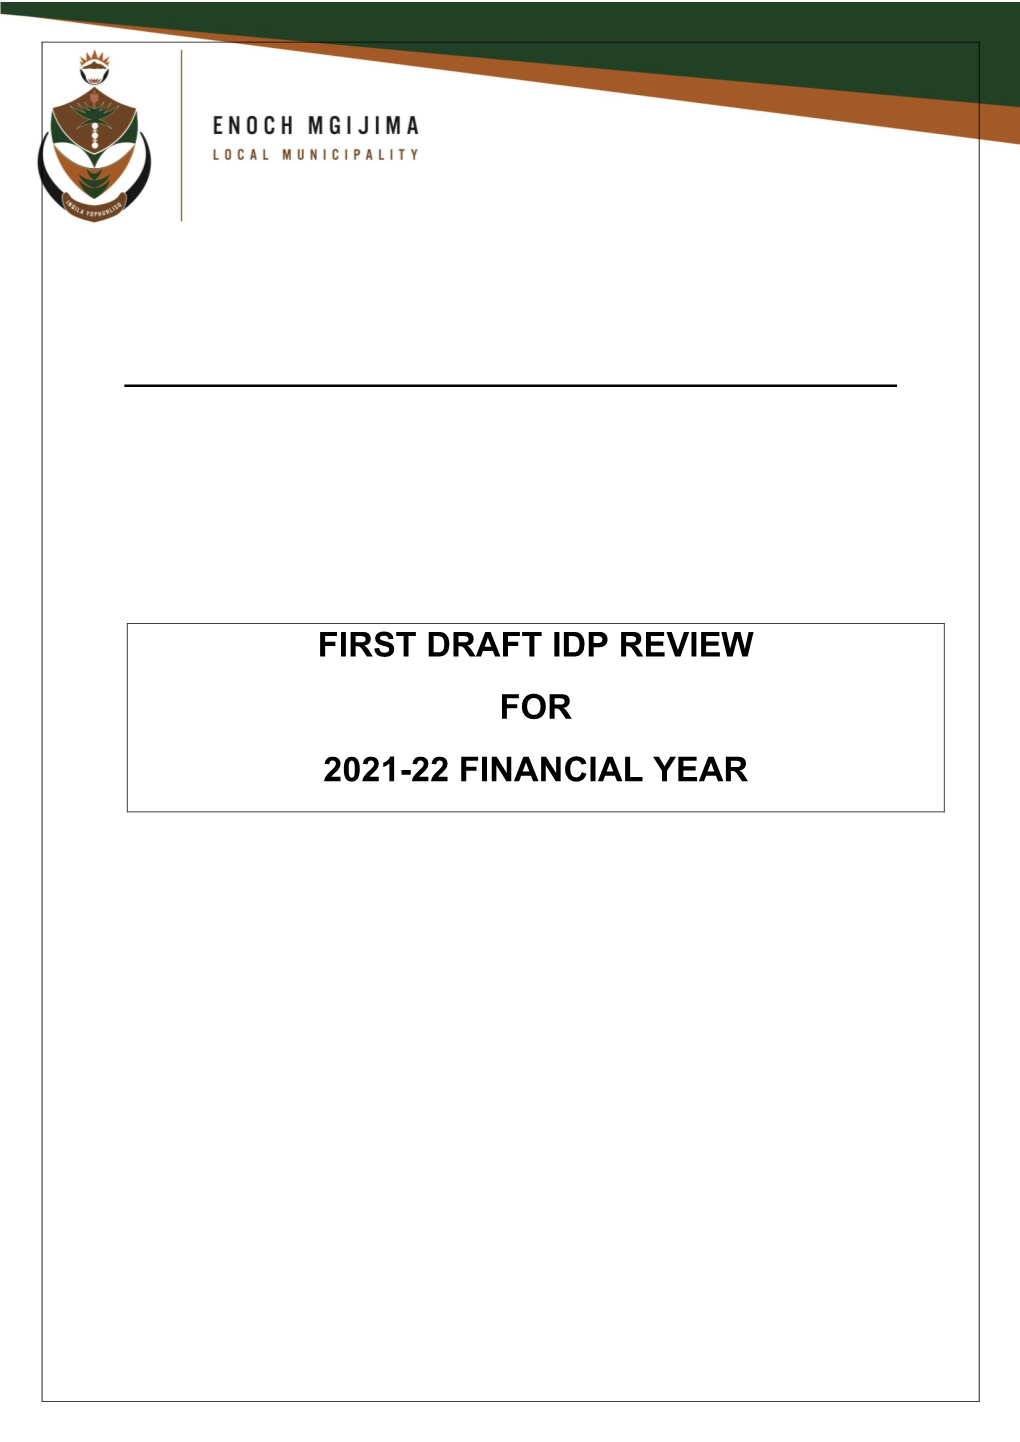 First Draft Idp Review for 2021-22 Financial Year